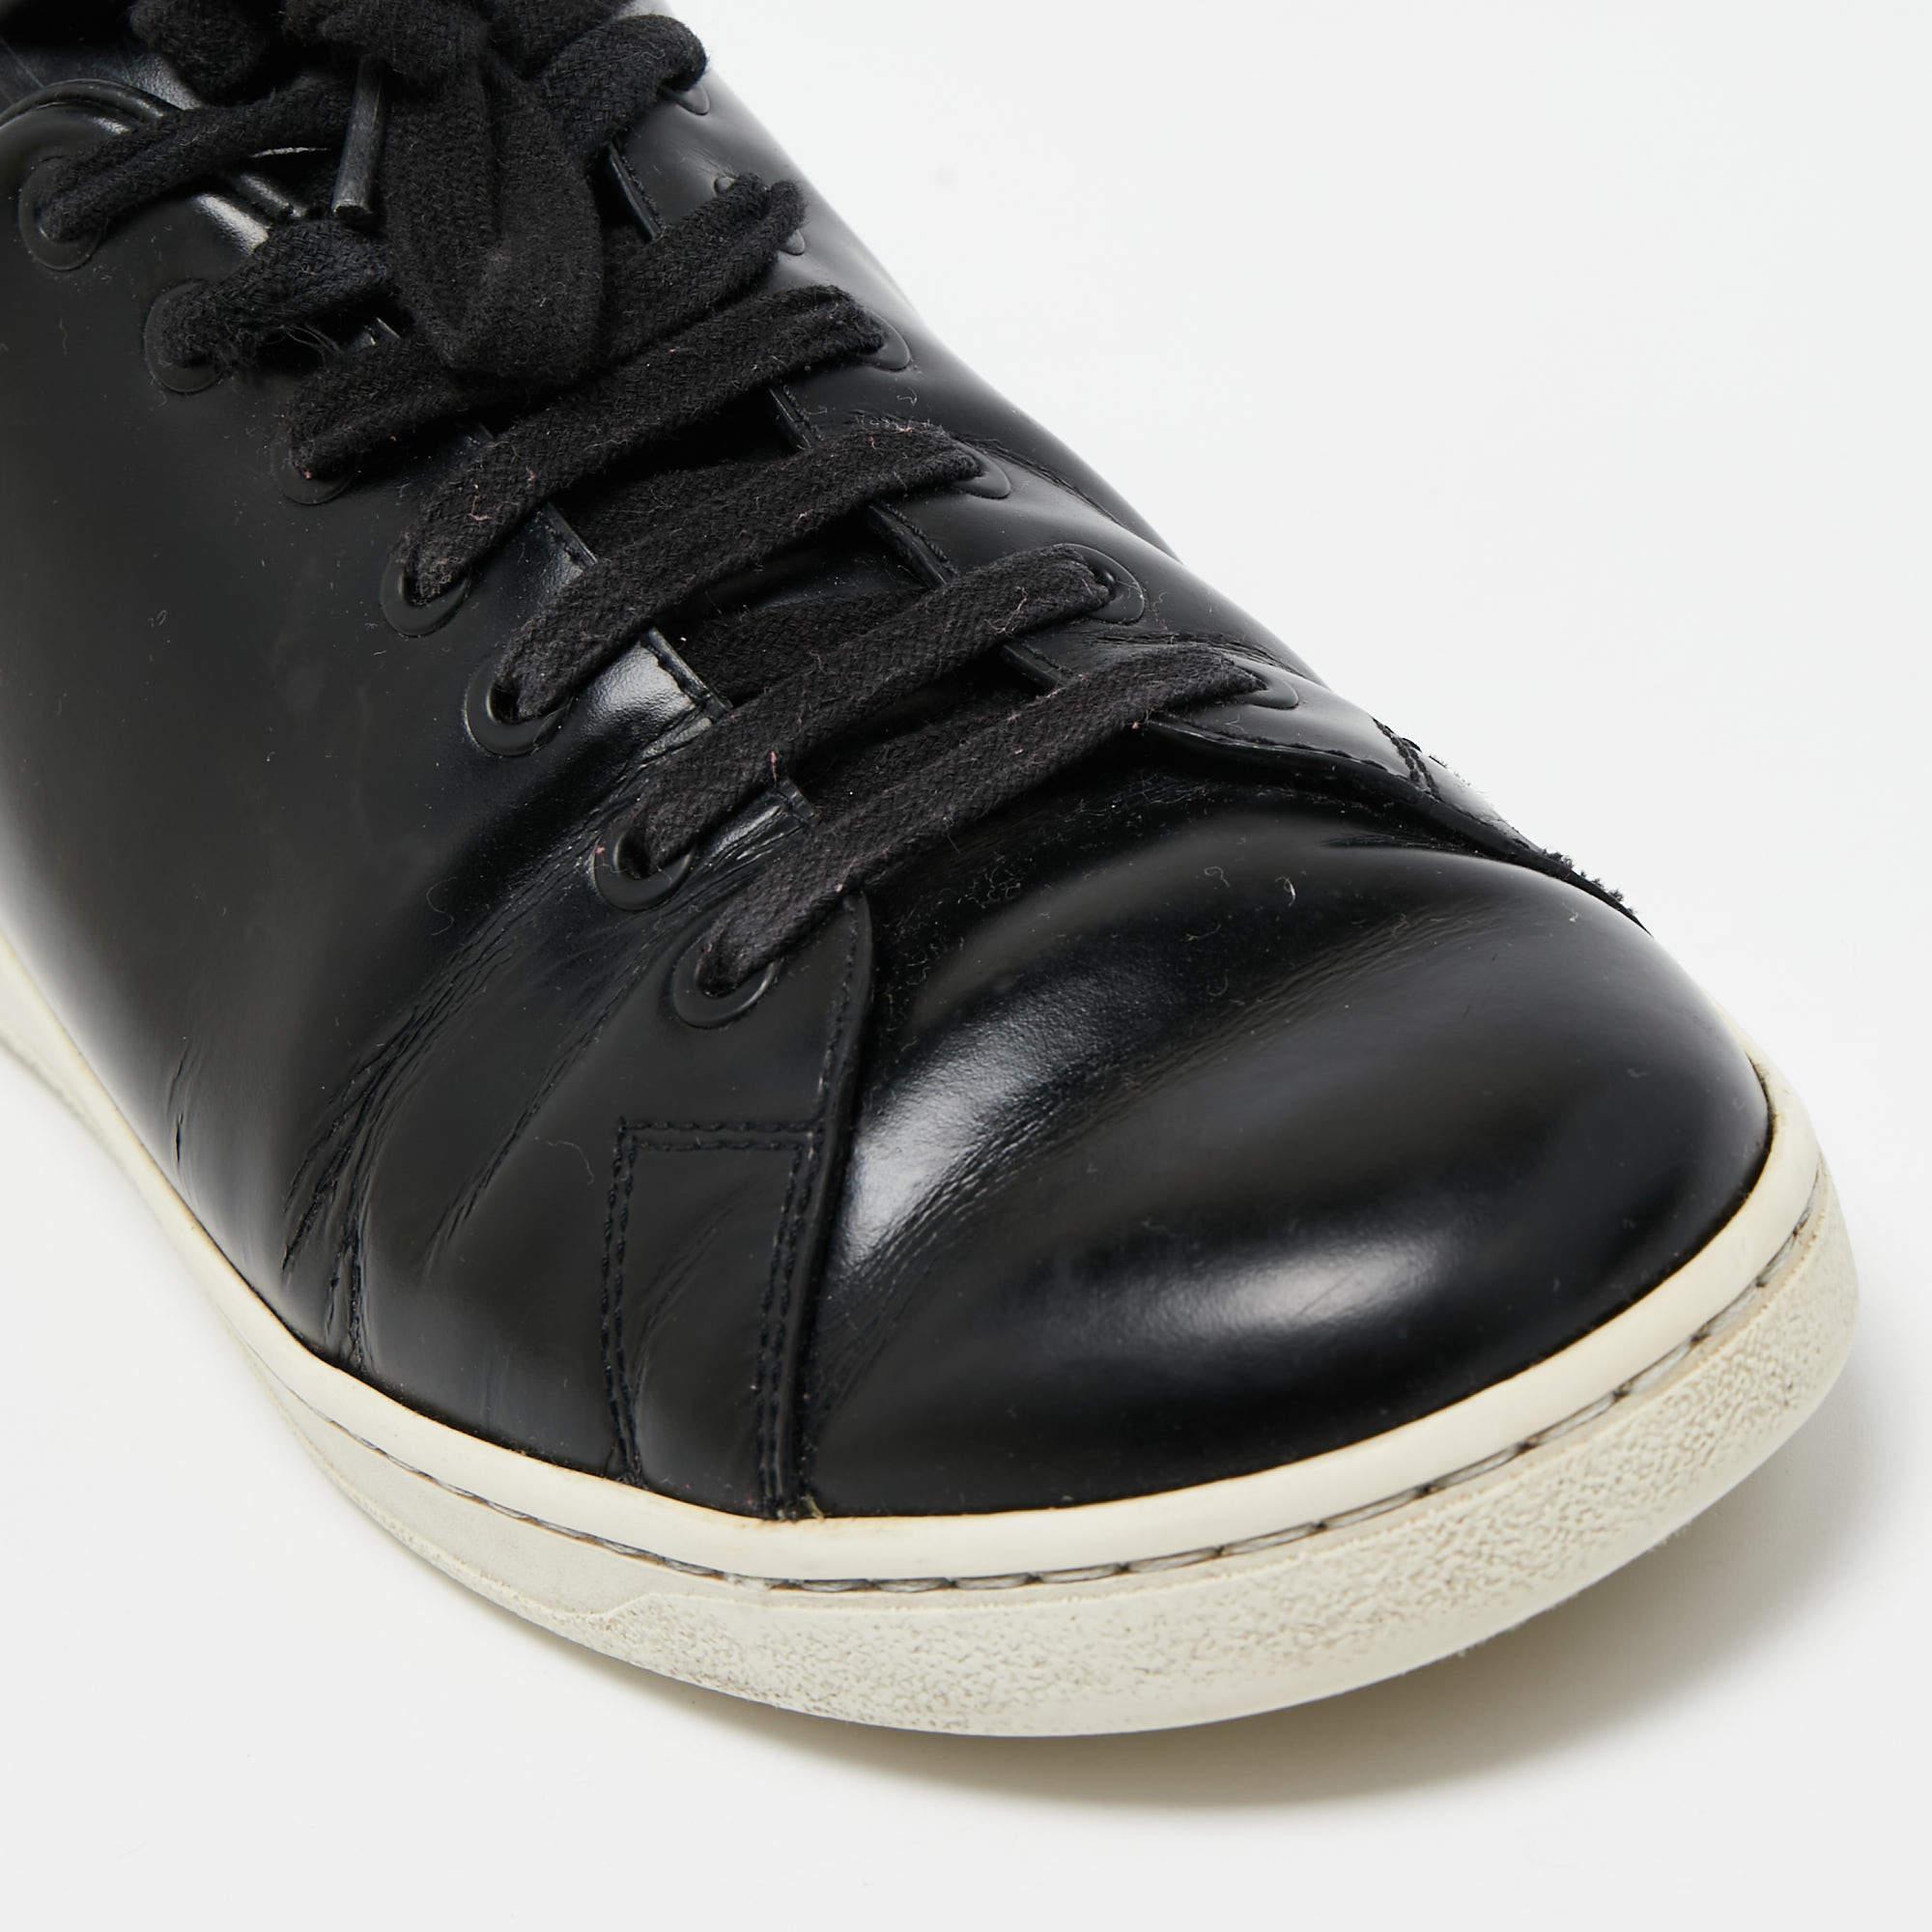 Valentino Black Leather VLogo Low Top Sneakers Size 42.5 For Sale 2